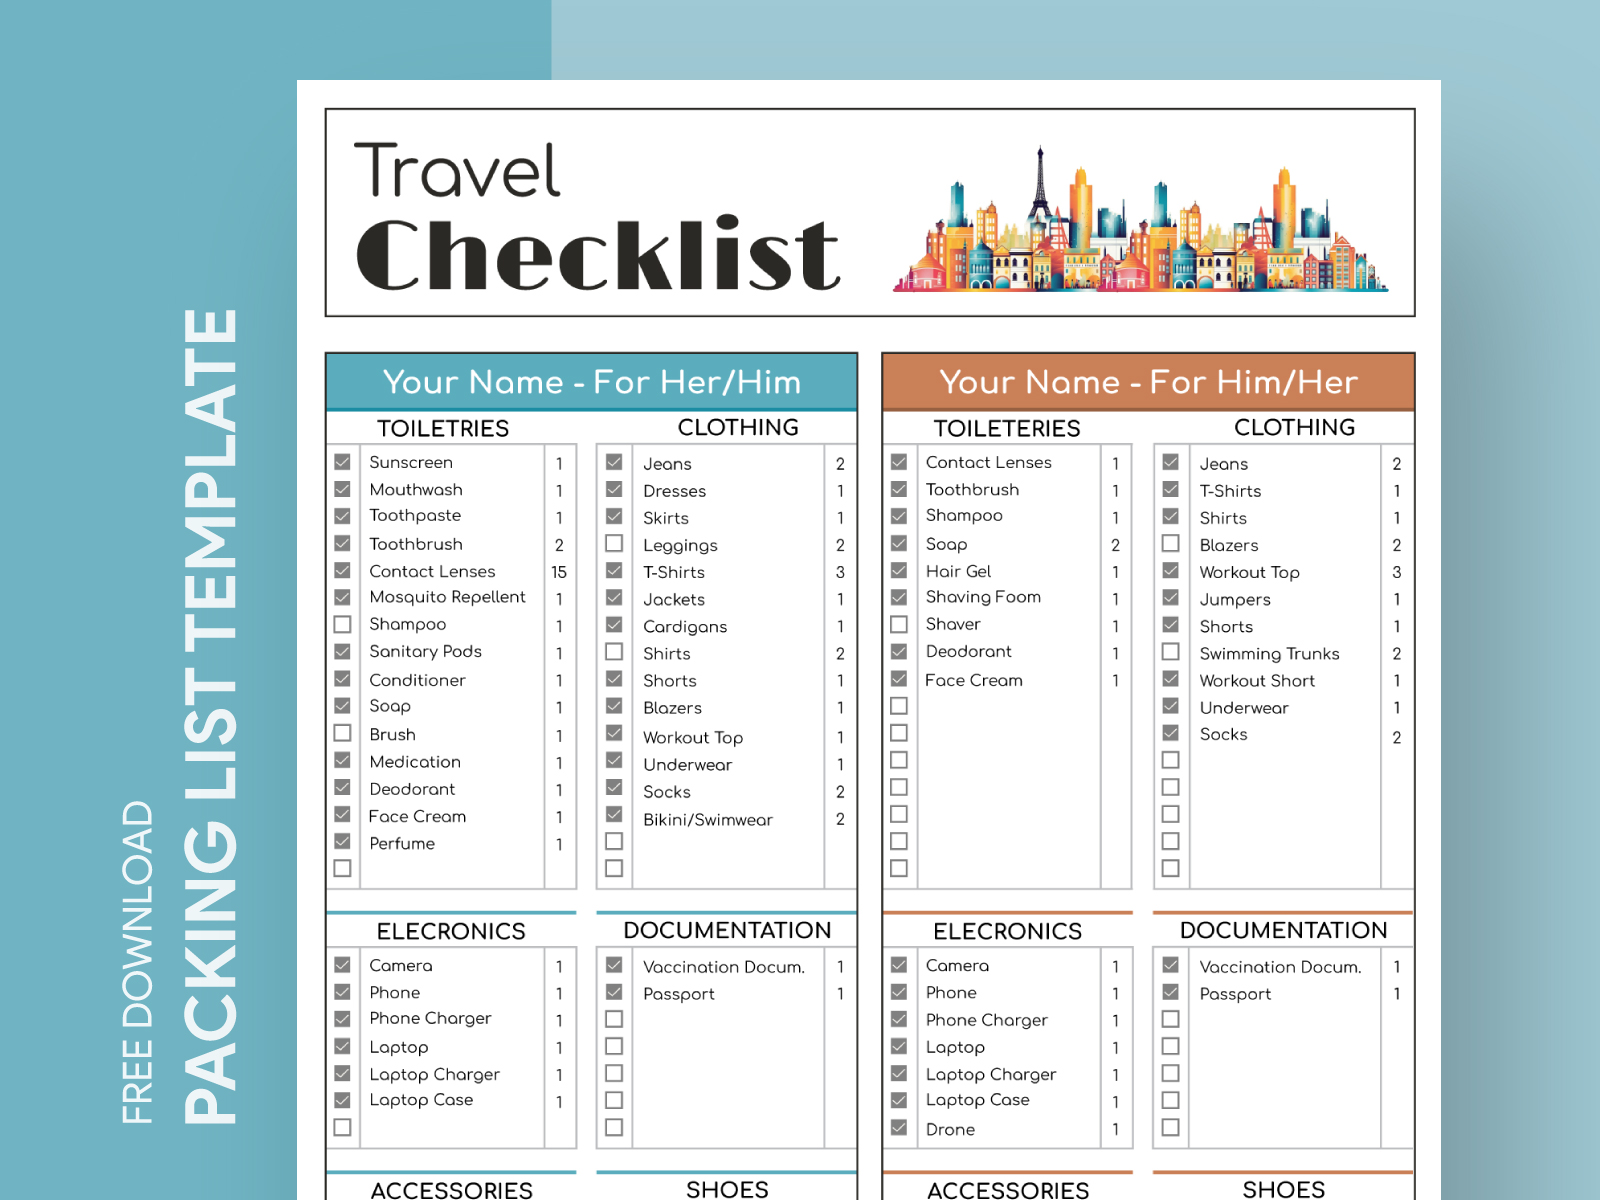 Travel Checklist Free Google Sheets Template by Free Google Docs Templates  - gdoc.io on Dribbble